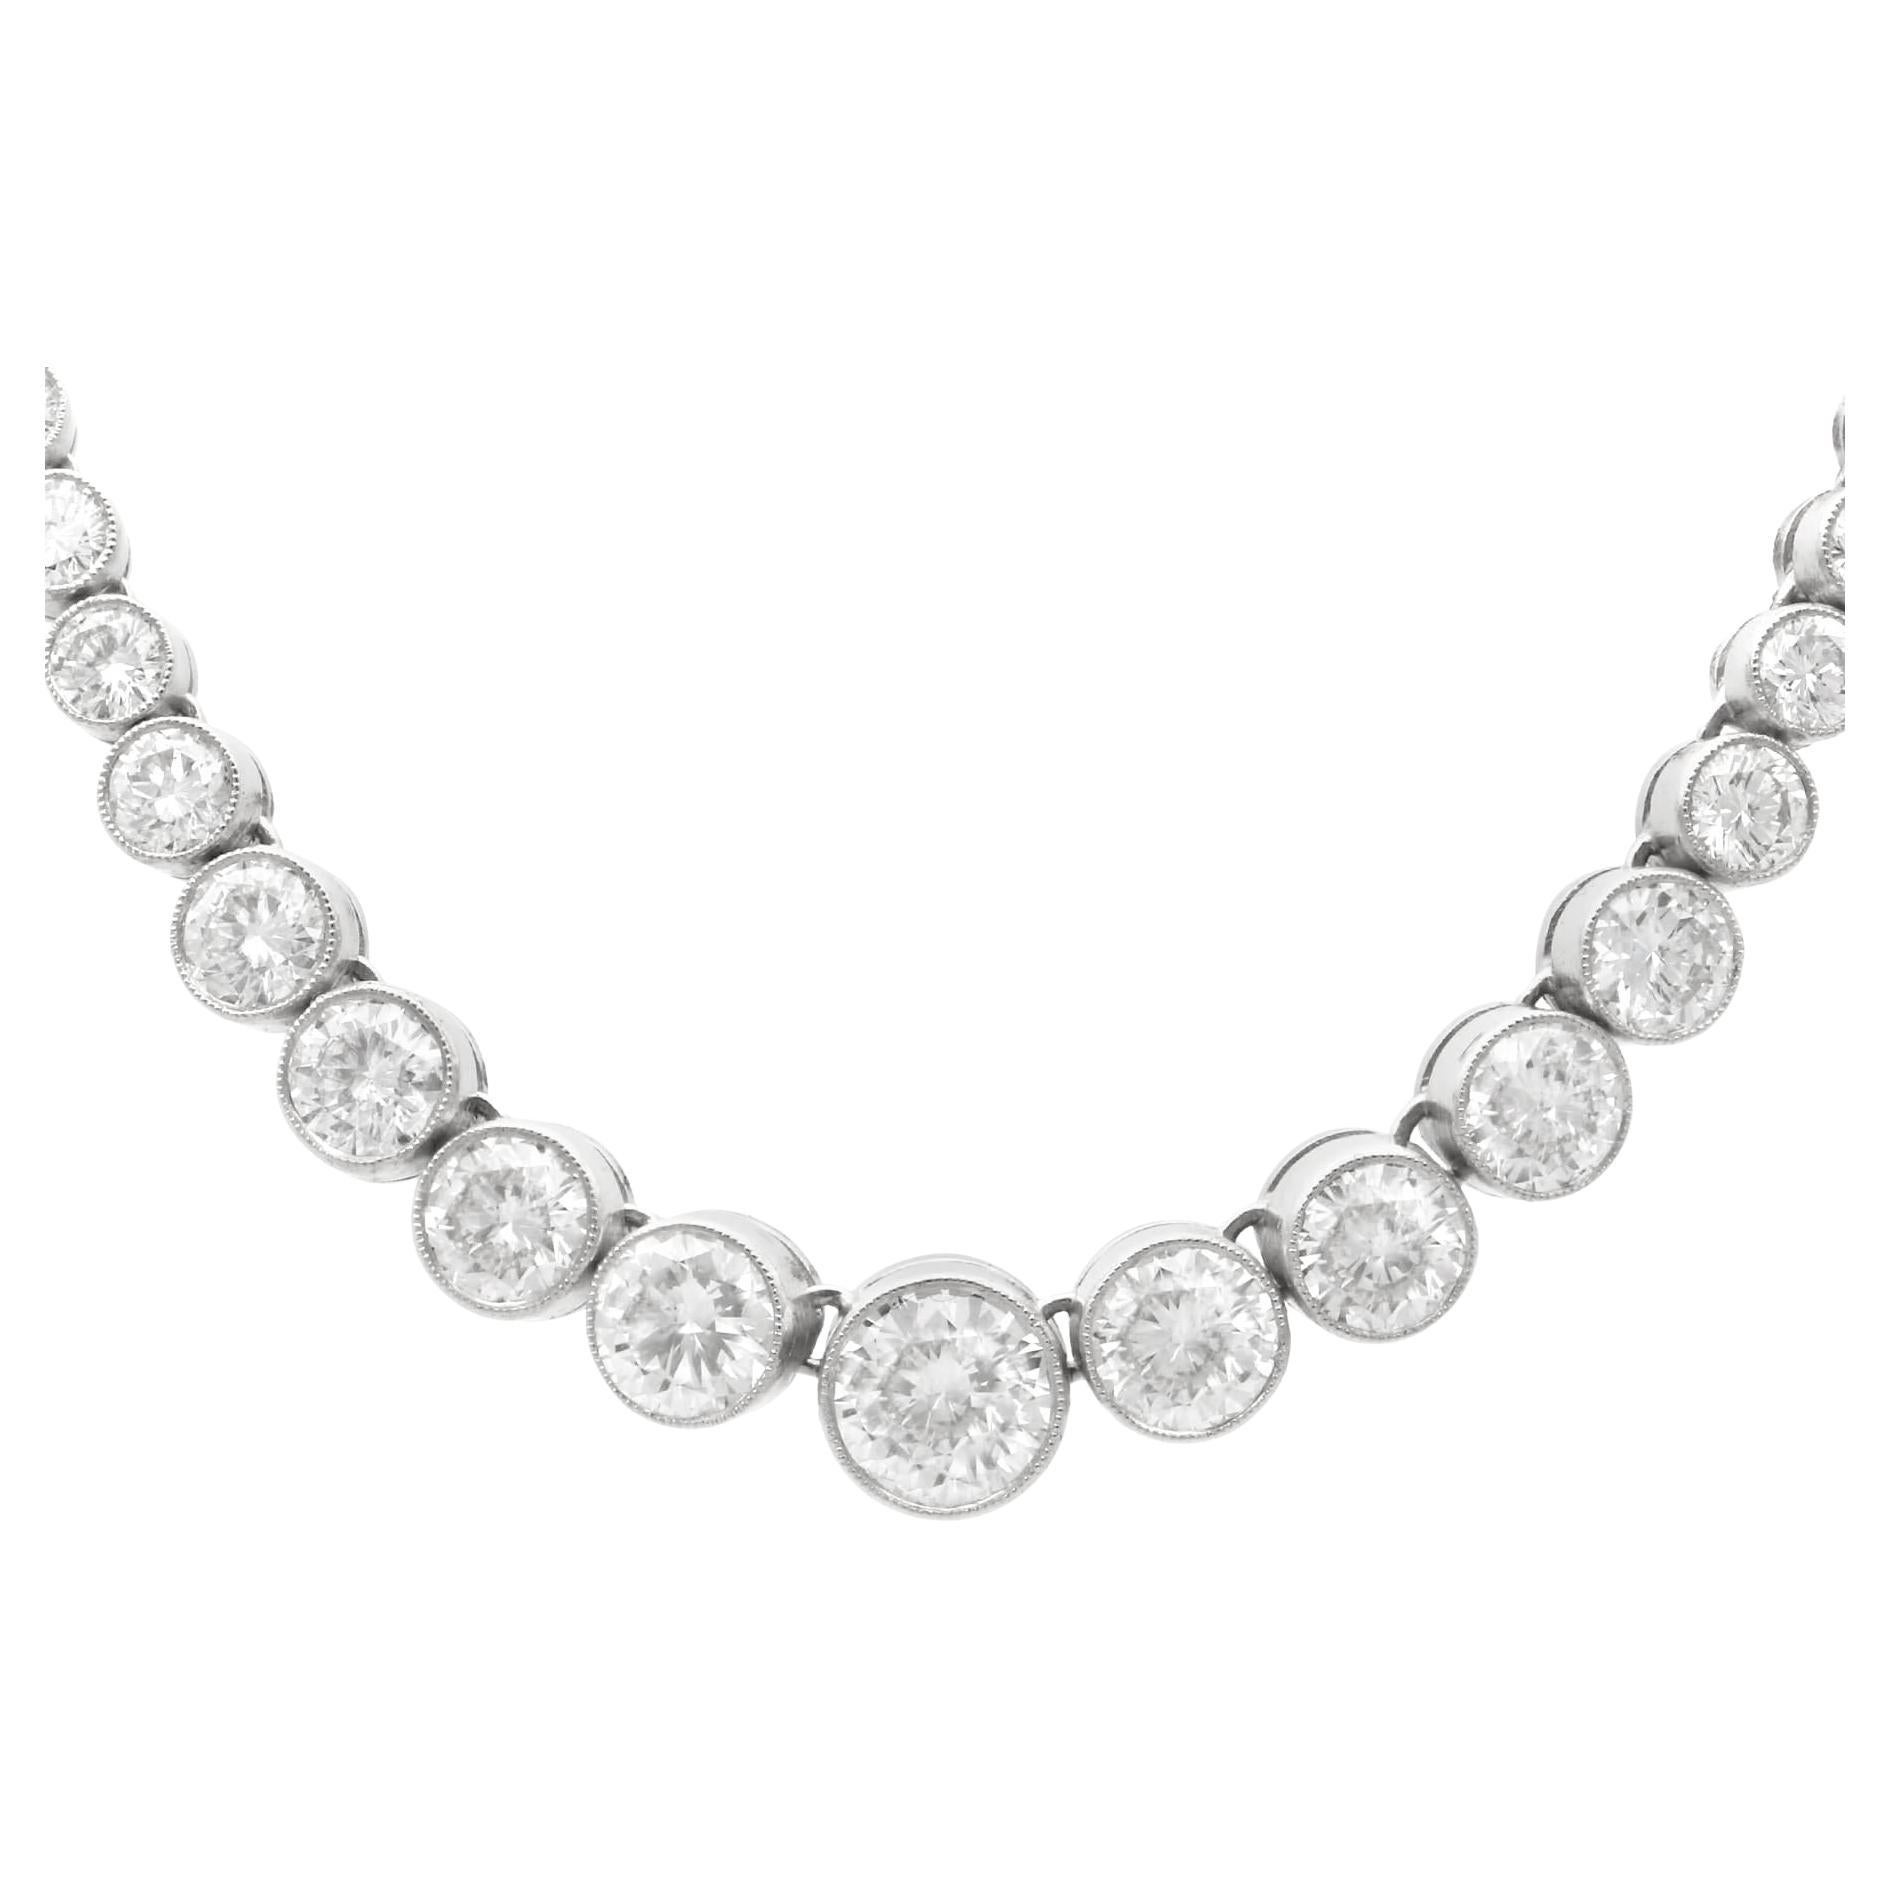 Vintage 11Ct Diamond and Platinum Riviere Necklace Circa 1950/Contemporary For Sale